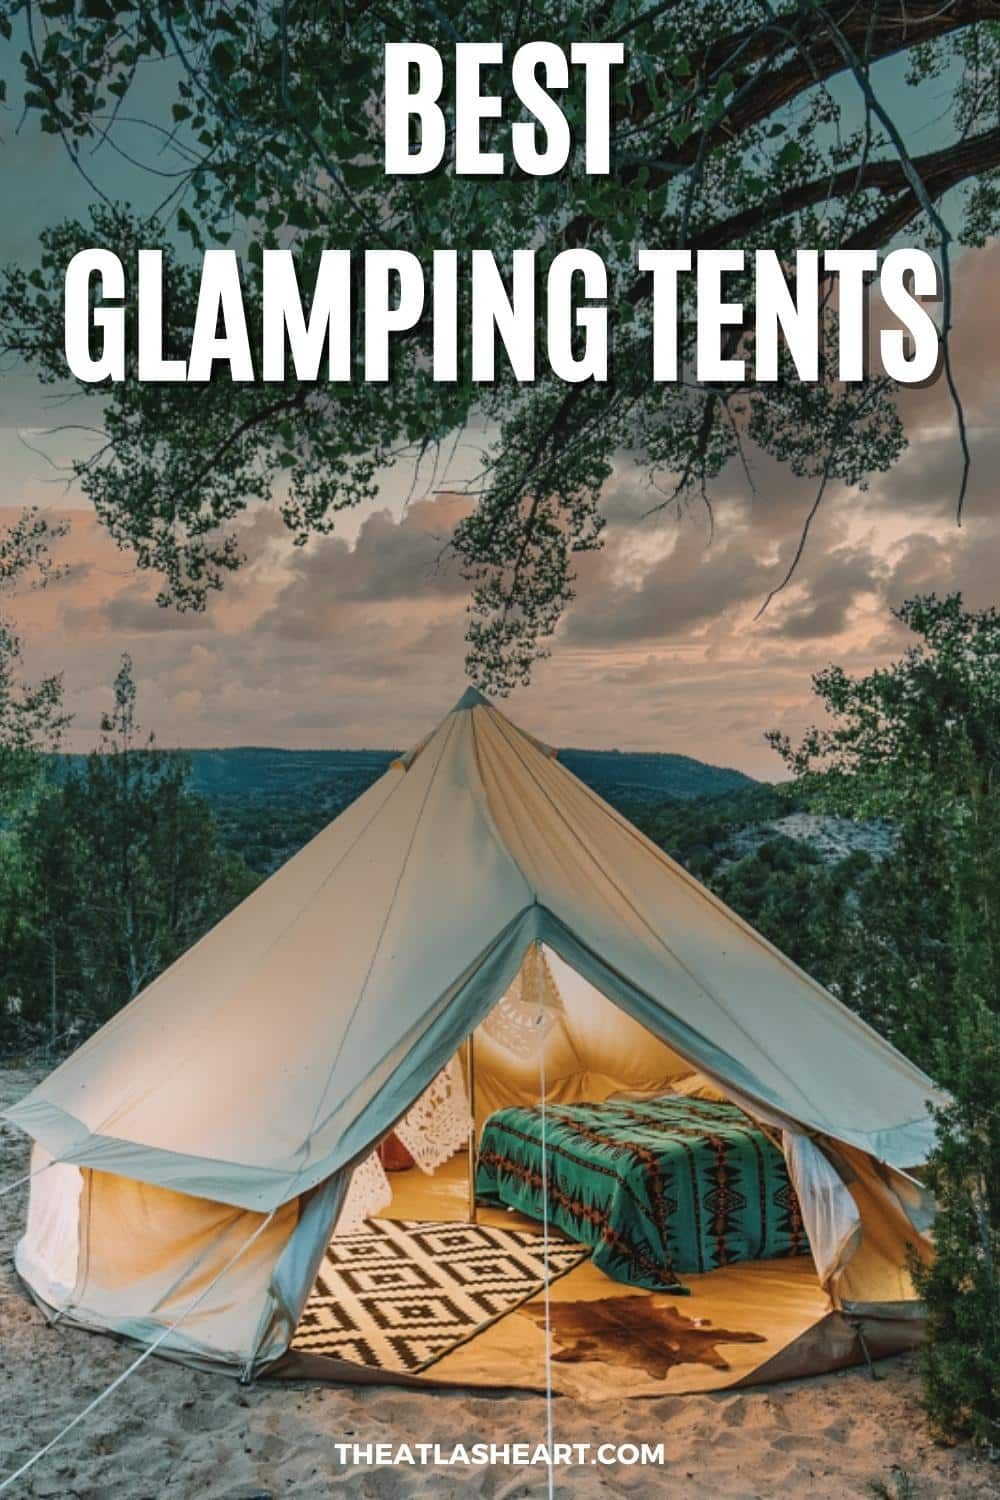 11 Best Glamping Tents for Camping in Style [Top Luxury Camping Tents]